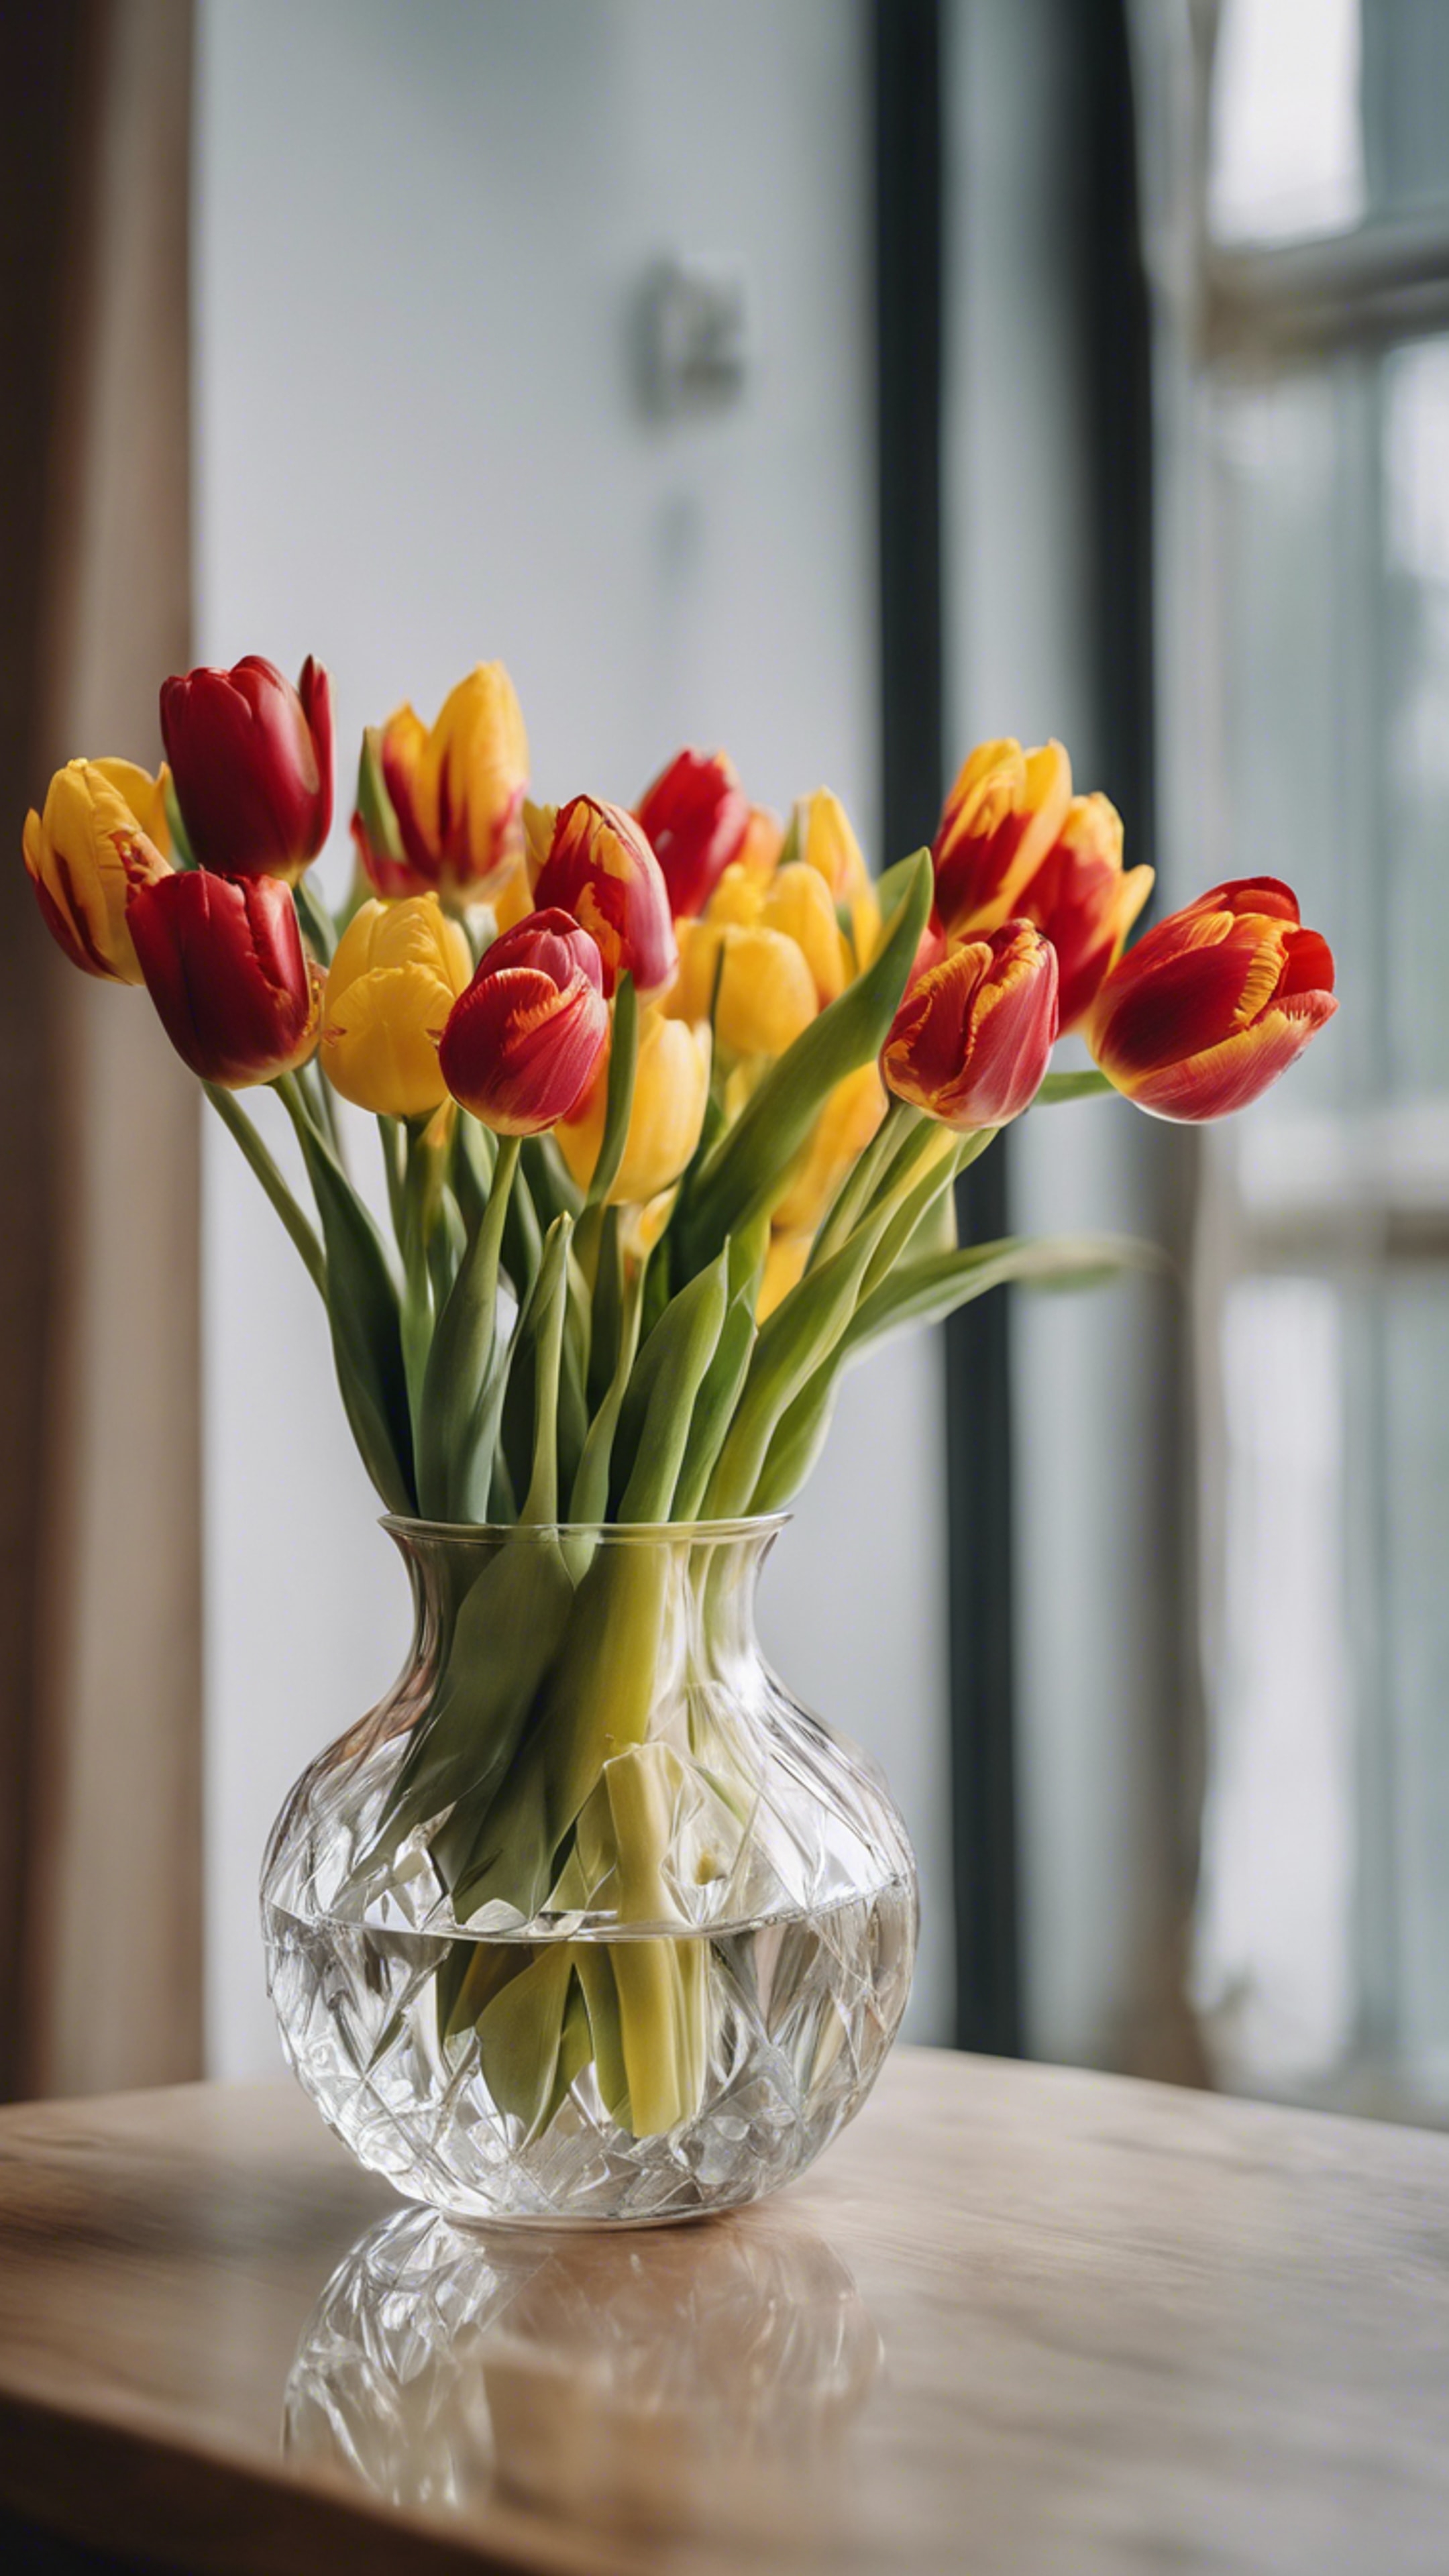 A bunch of fresh red and yellow tulips resting in a crystal clear vase. Tapéta[770eab0b3cc545c1af9b]